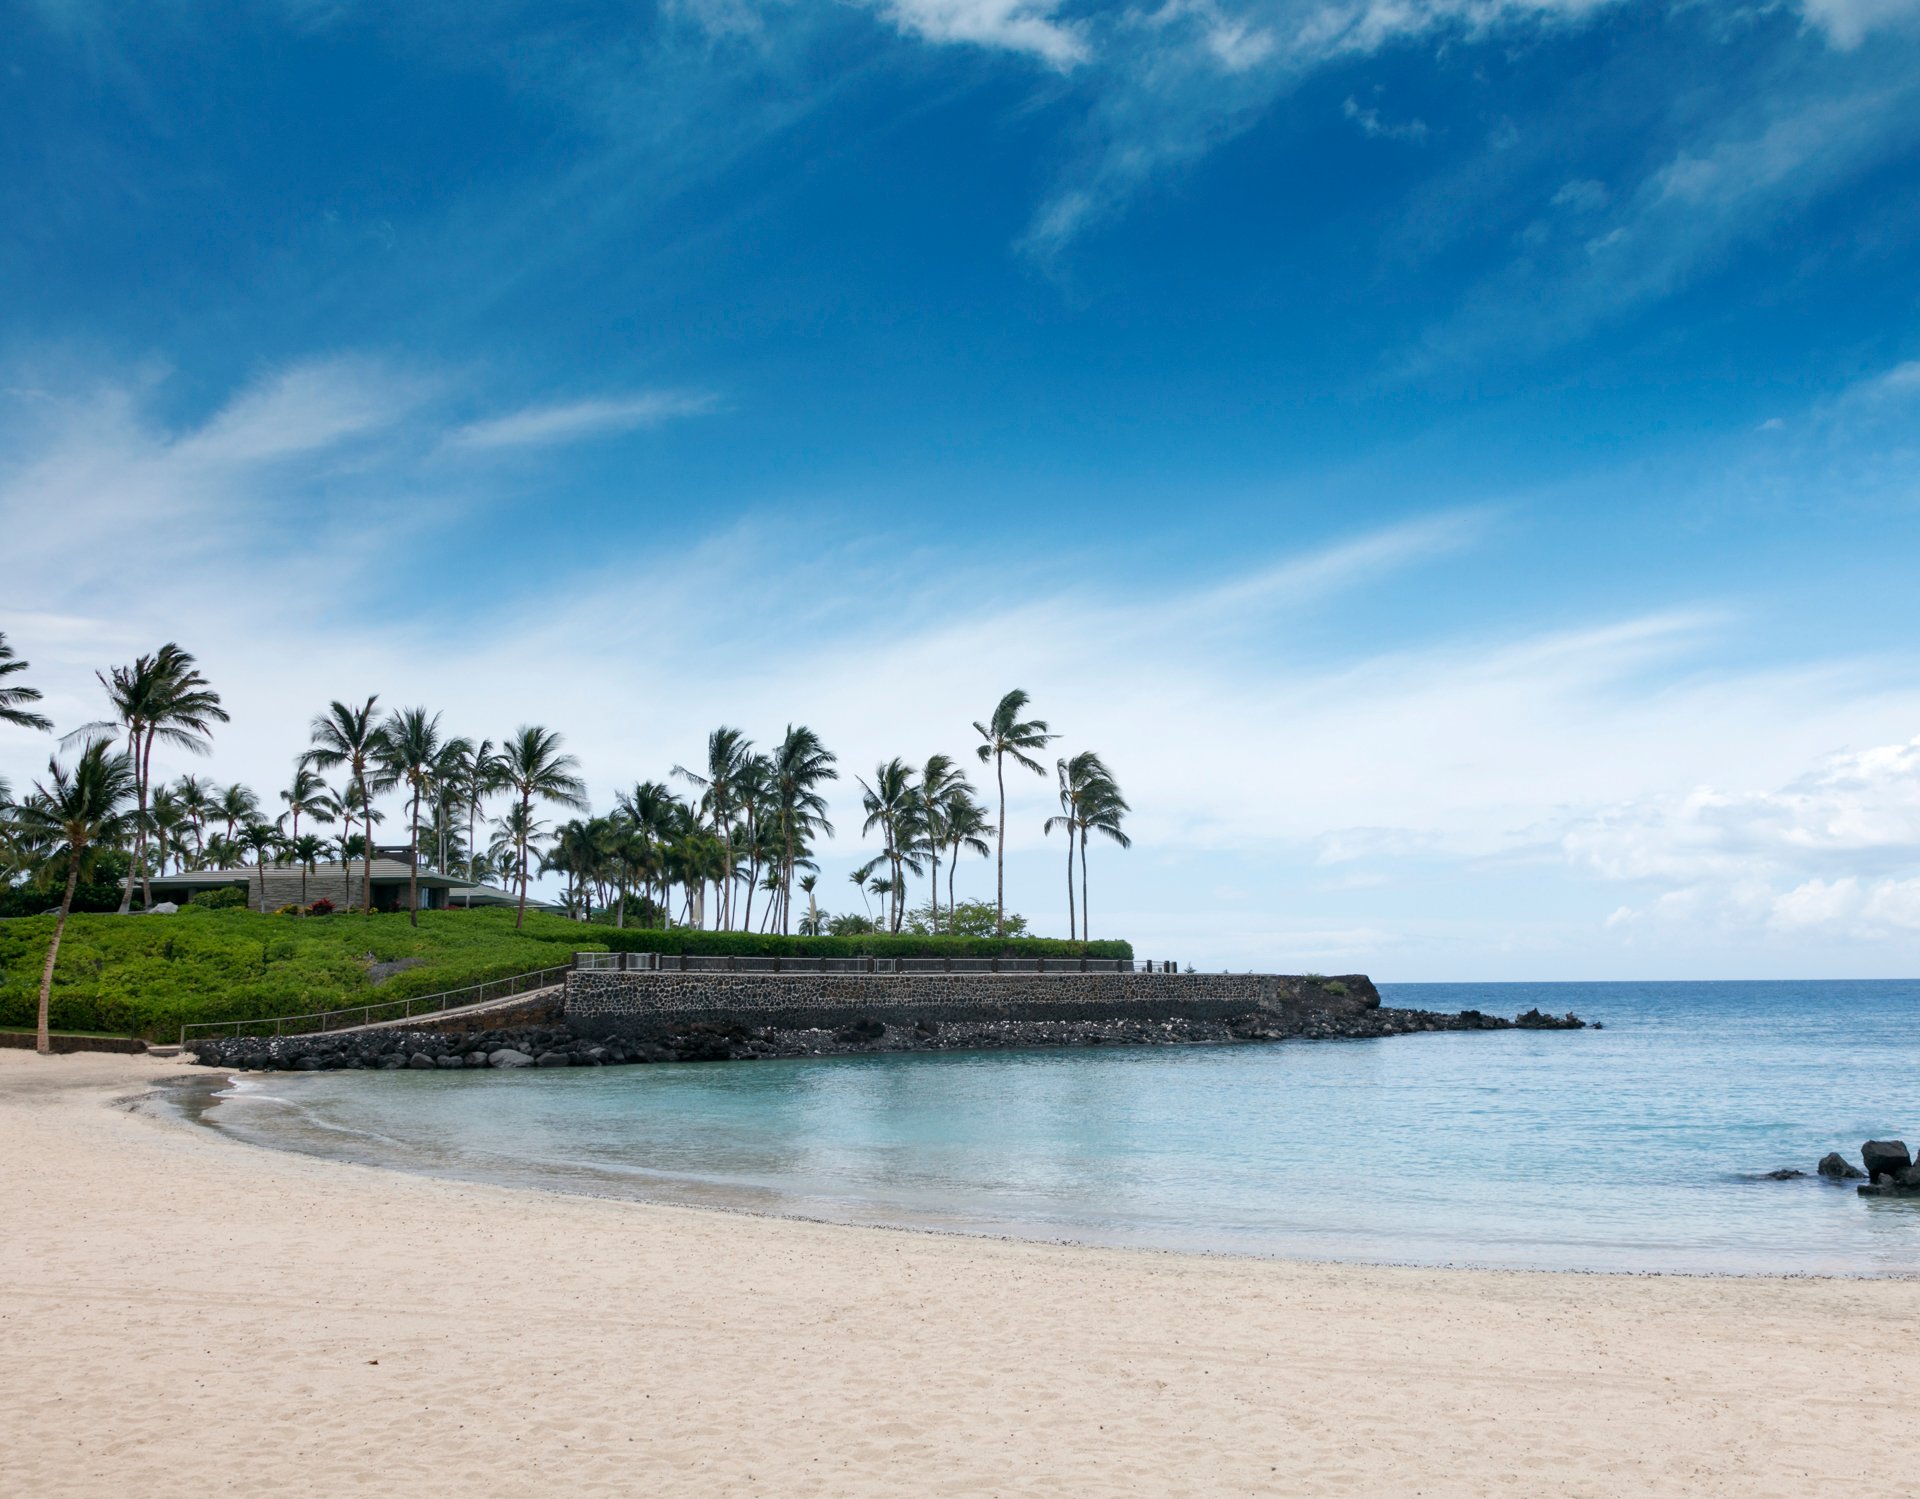 njoy Free access to the Mauna Lani Private Beach Club - Great snorkeling!